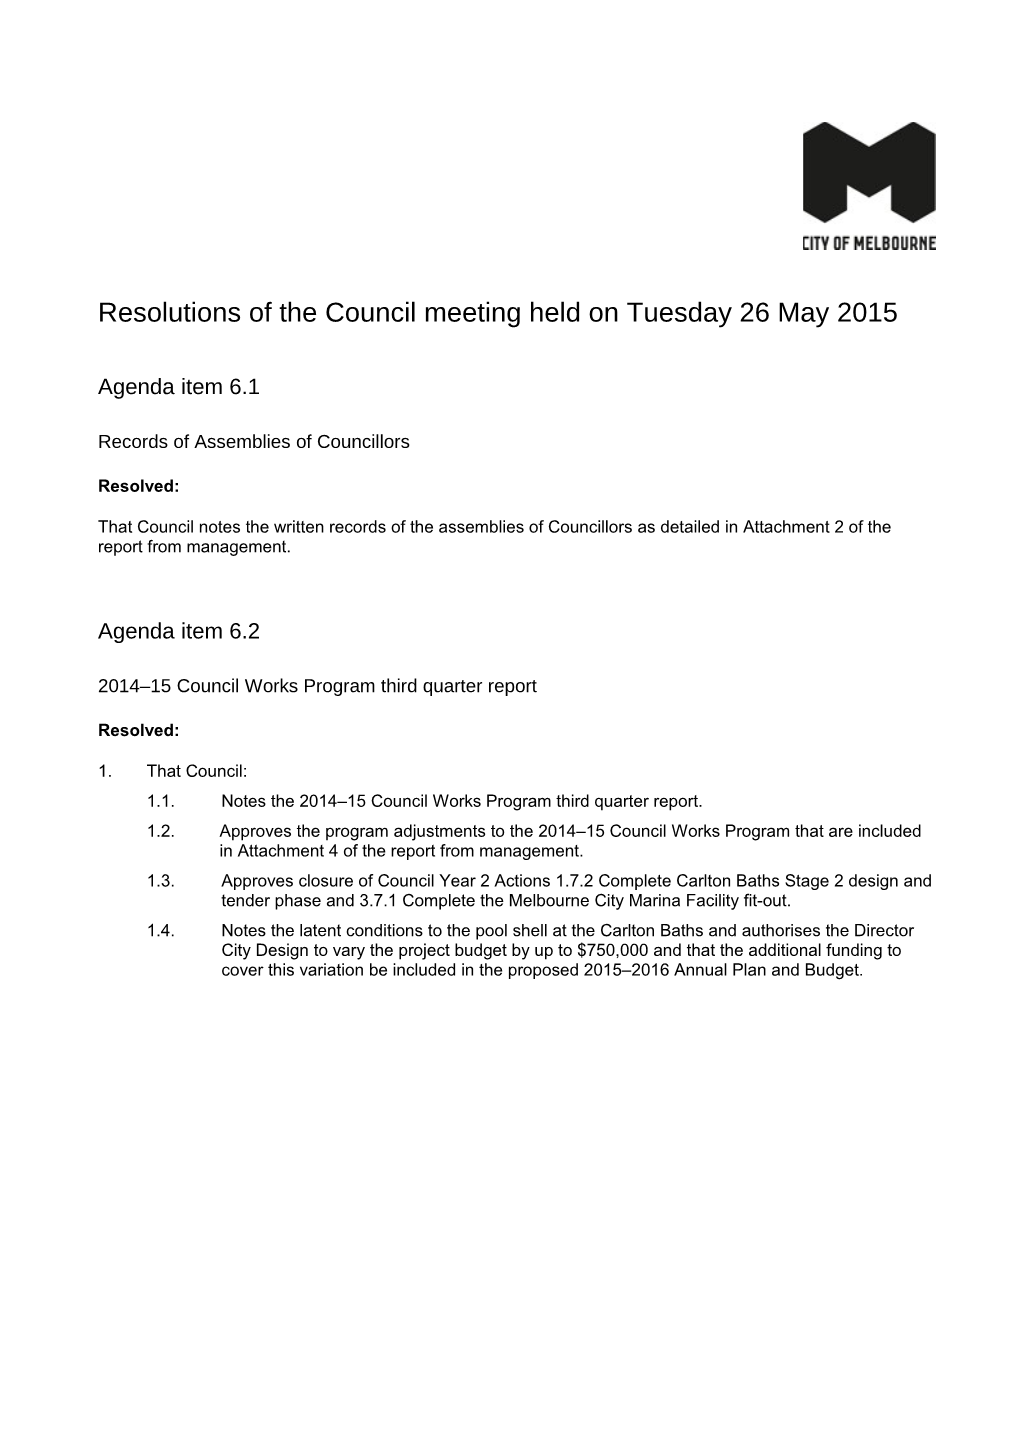 Resolutions of the Council Meeting Held on Tuesday 26 May 2015